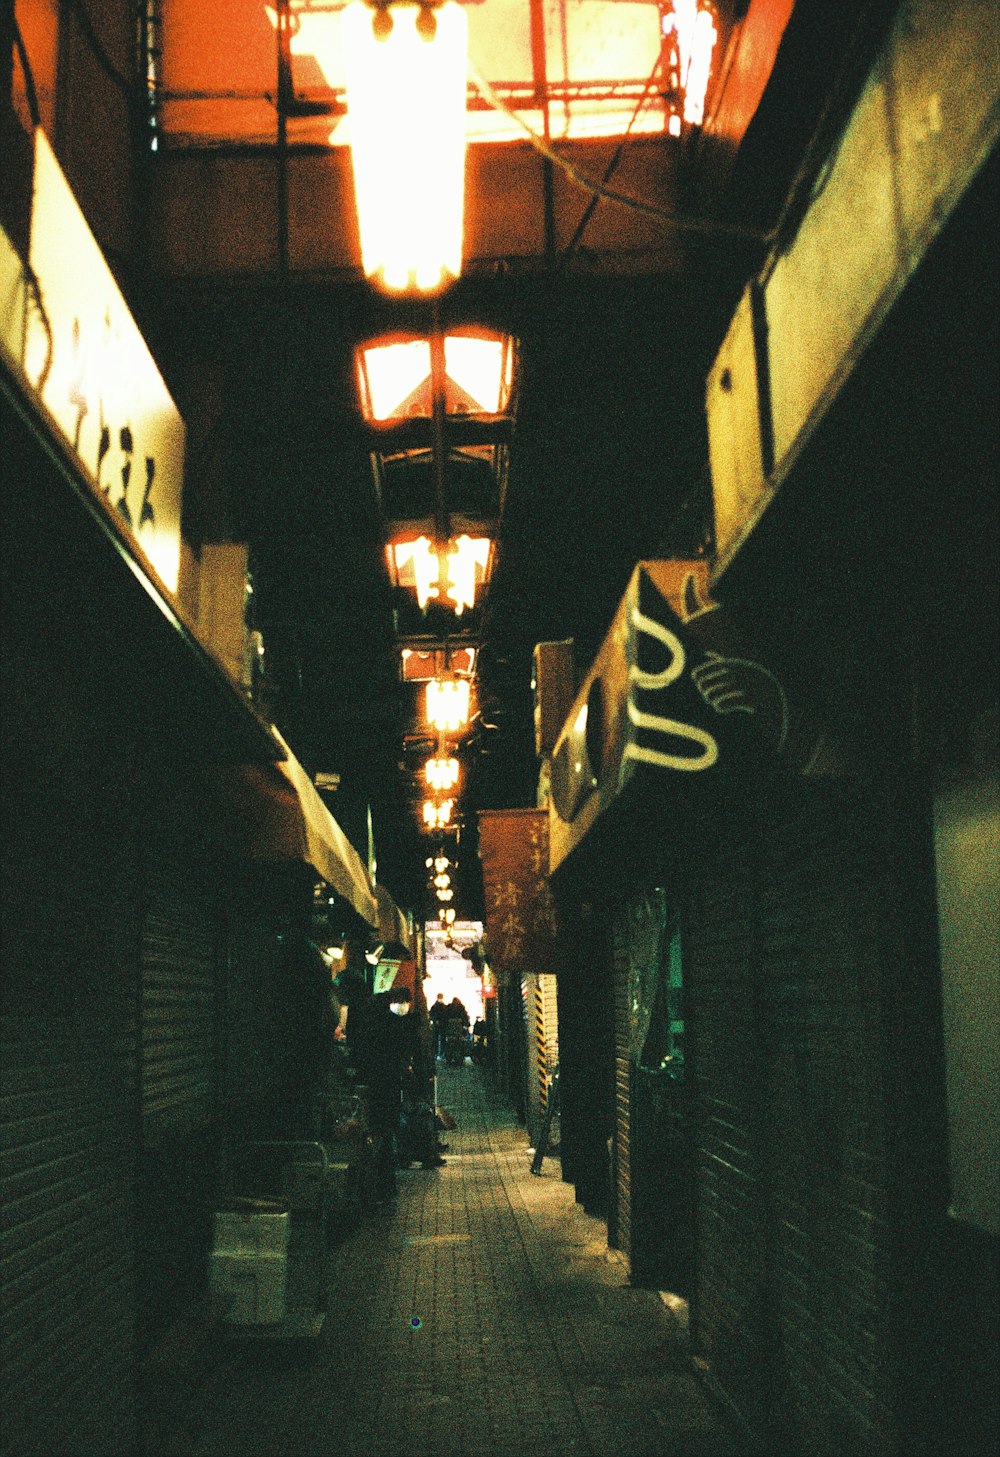 a narrow alley way with people walking down it